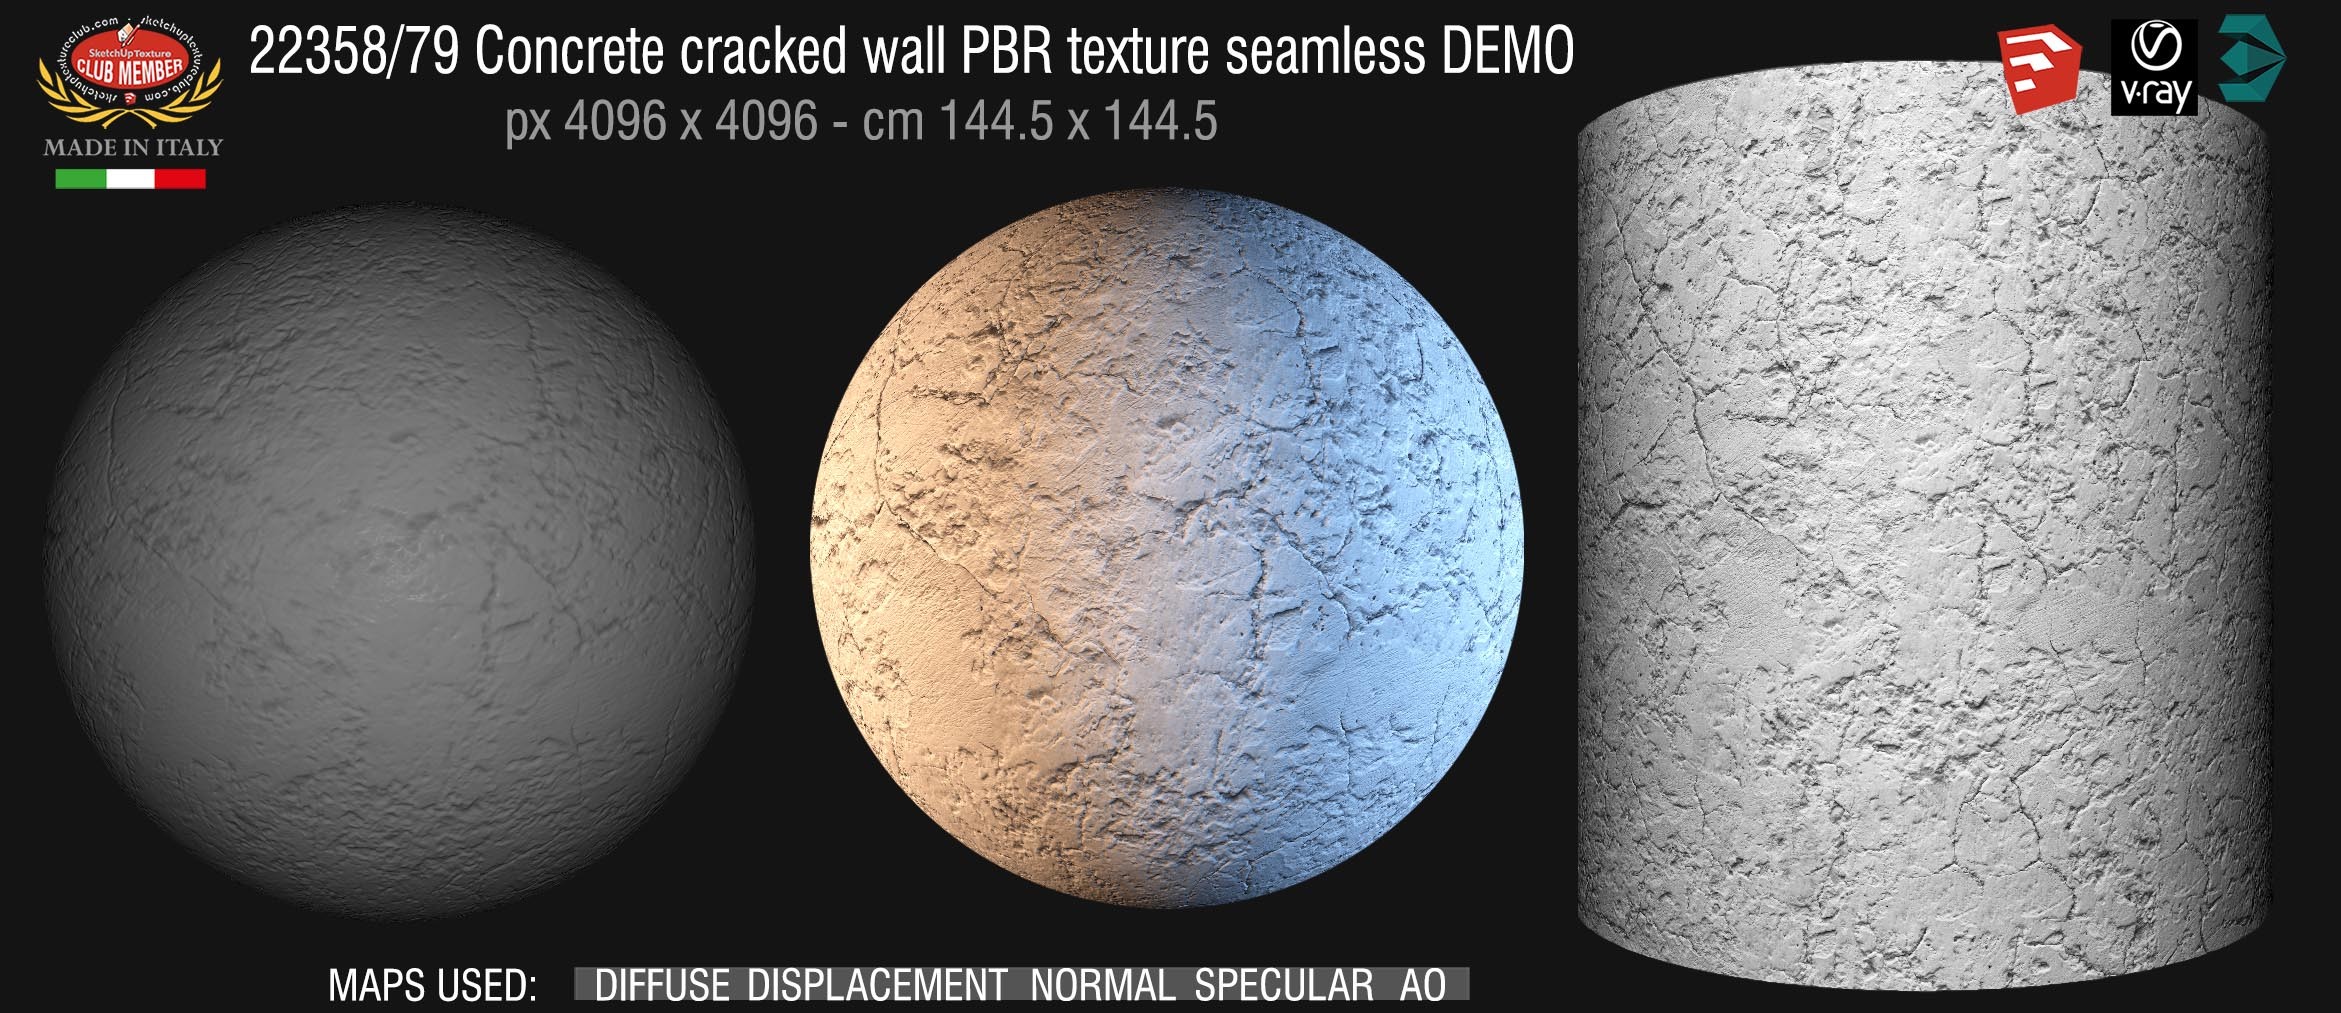 22358_79 Concrete cracked wall PBR texture seamless DEMO